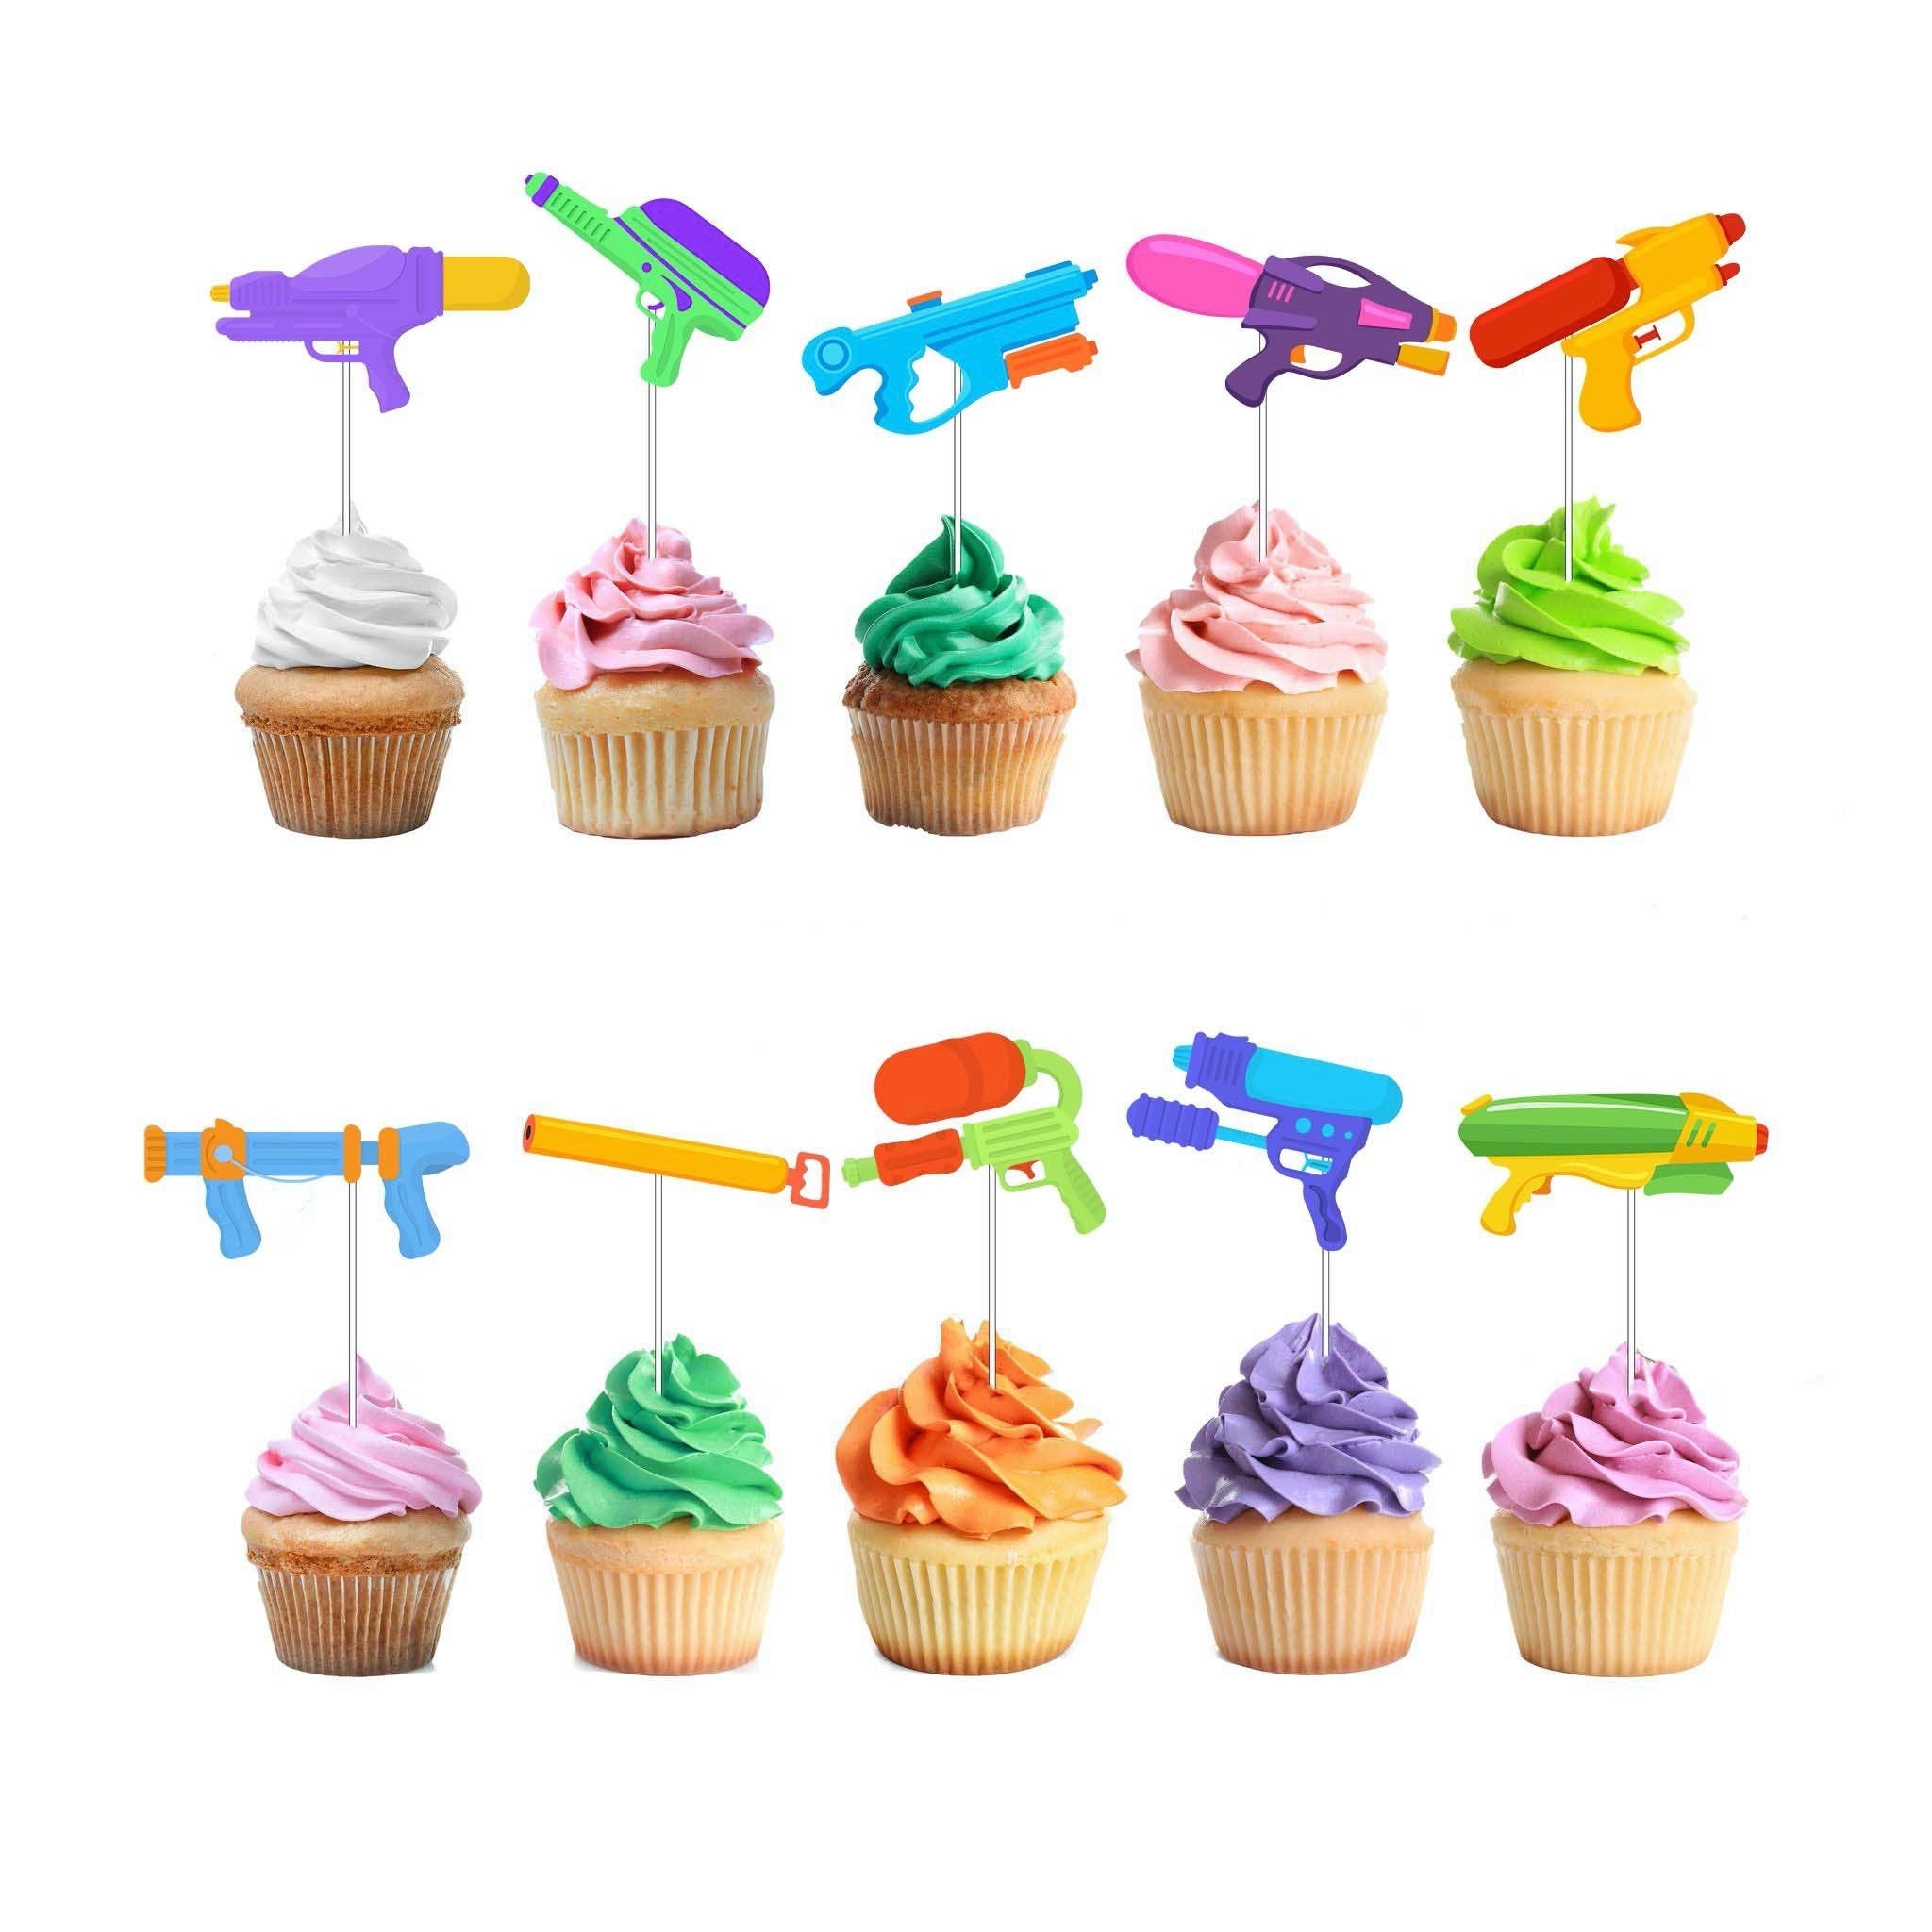 Super Soaker Water Gun Cupcake Toppers - Make a Splash at Your Next Party!